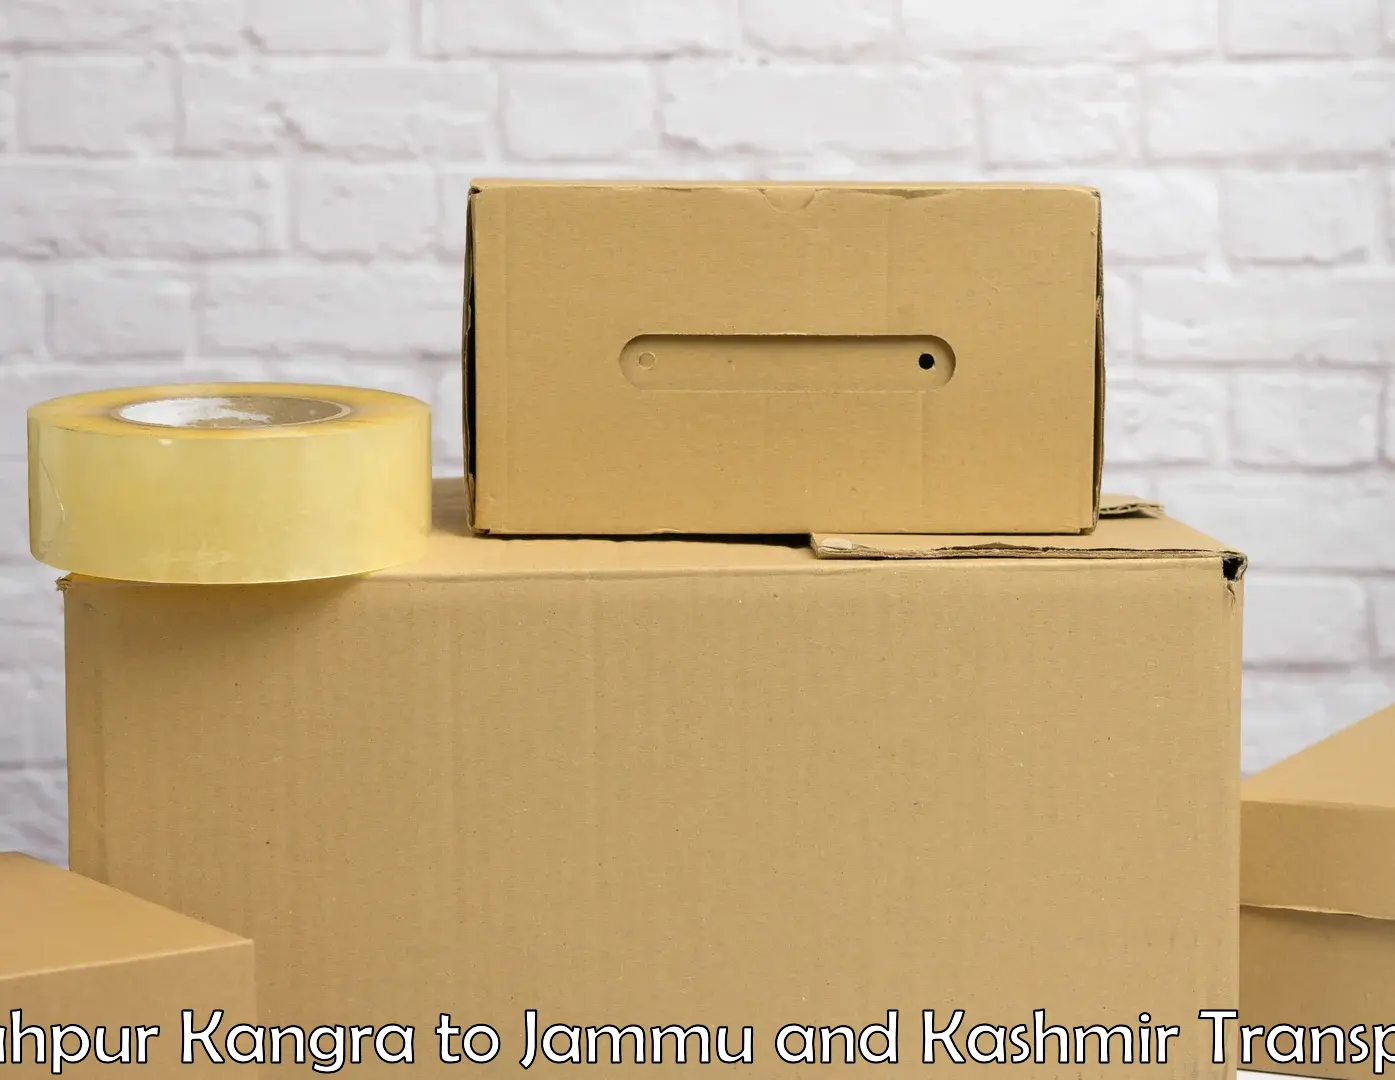 Air freight transport services in Shahpur Kangra to University of Jammu